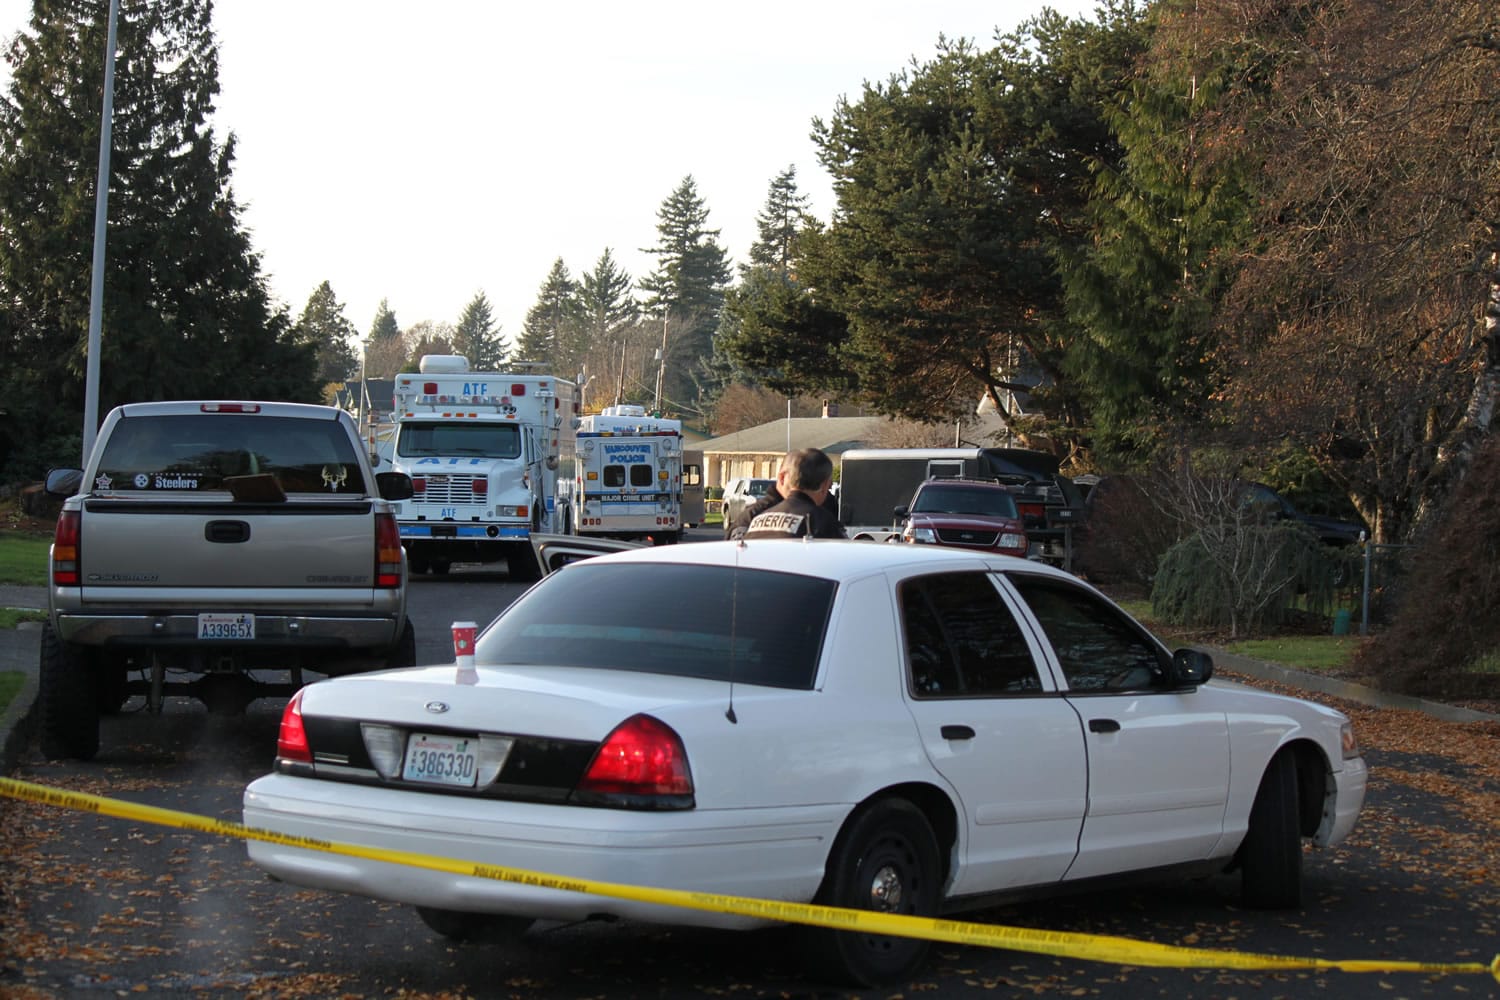 On Thursday, more than 20 investigators were at the scene of Wednesday's shooting and house fire on F Place in Washougal.